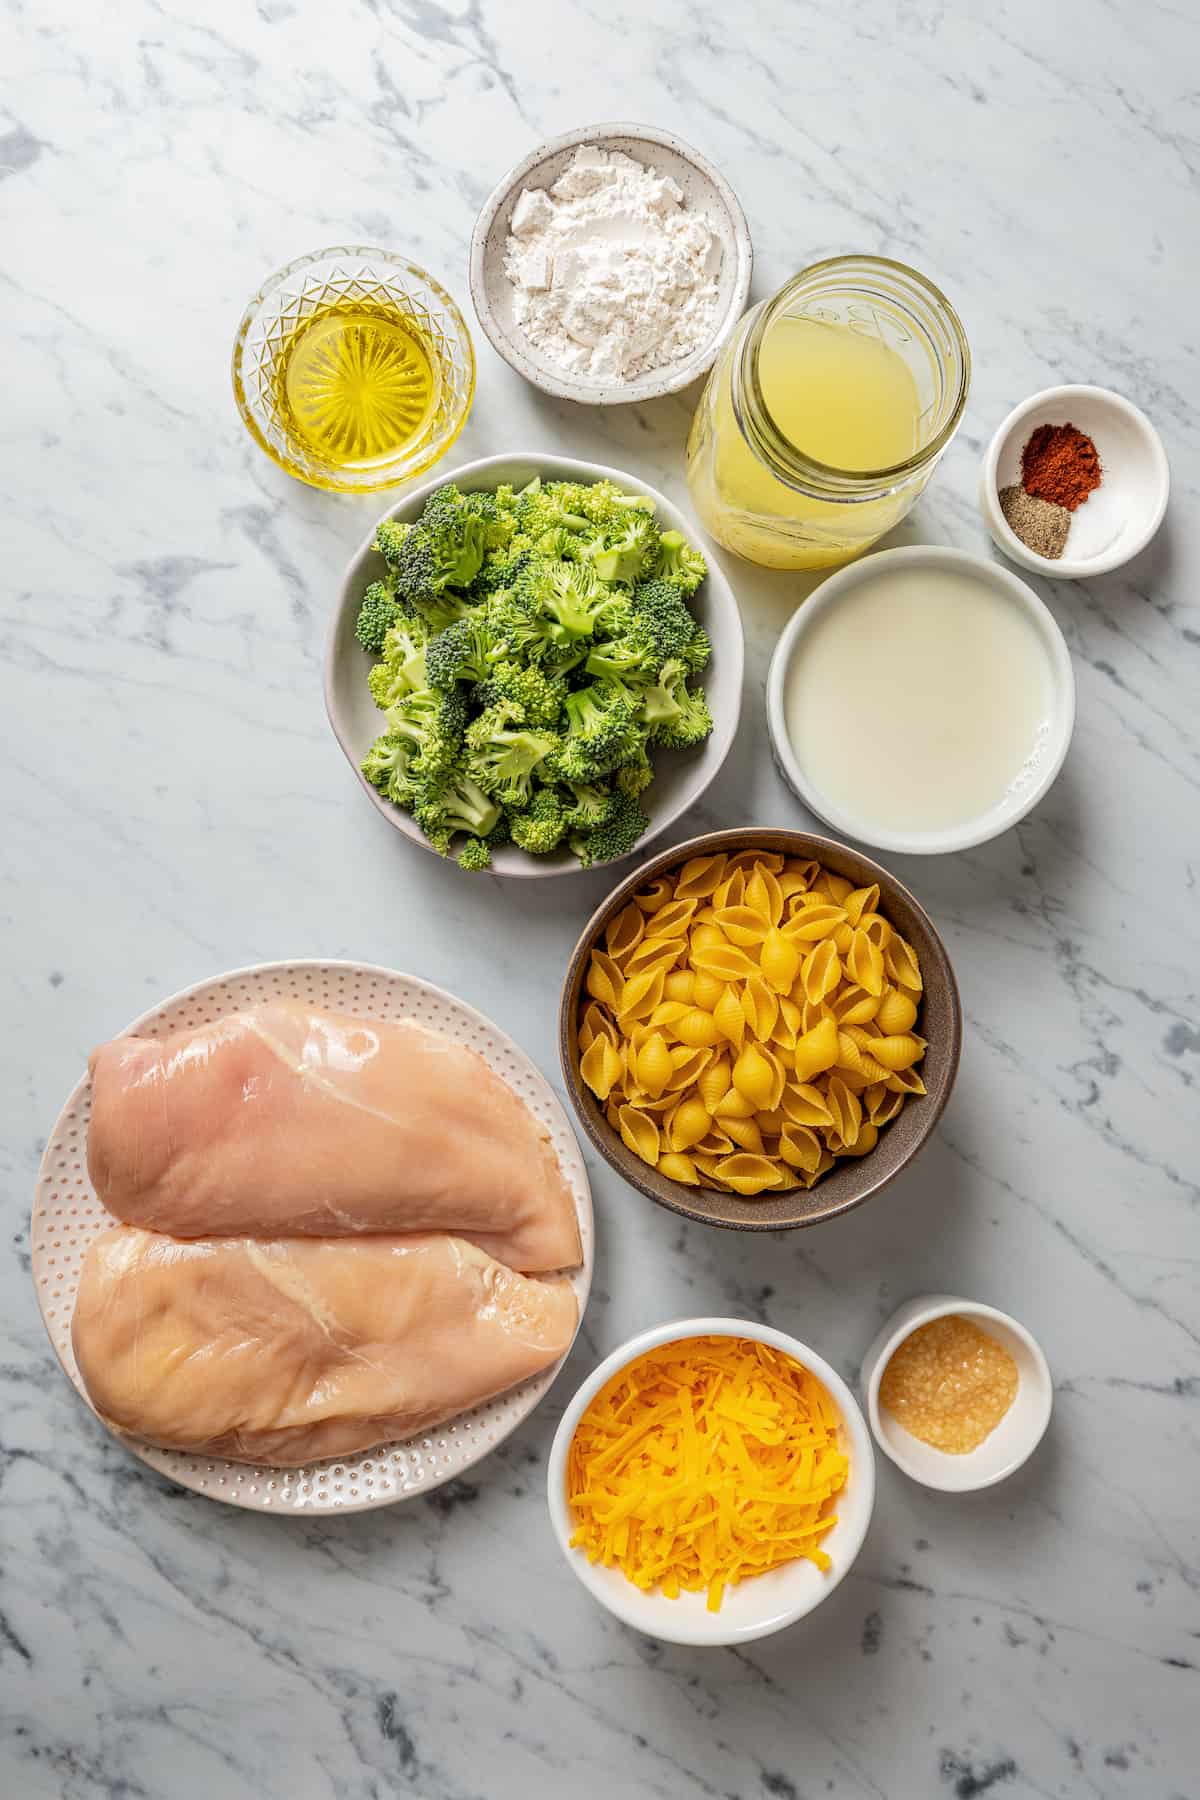 Overhead view of the ingredients needed for chicken broccoli pasta: a plate with raw chicken breasts, a bowl of shredded cheddar cheese, a bowl of broccoli, a bowl of pasta shells, a bowl of milk, a jar of chicken broth, a bowl of olive oil, a bowl of flour, a bowl of garlic, and a bowl of salt, pepper, and chili powder